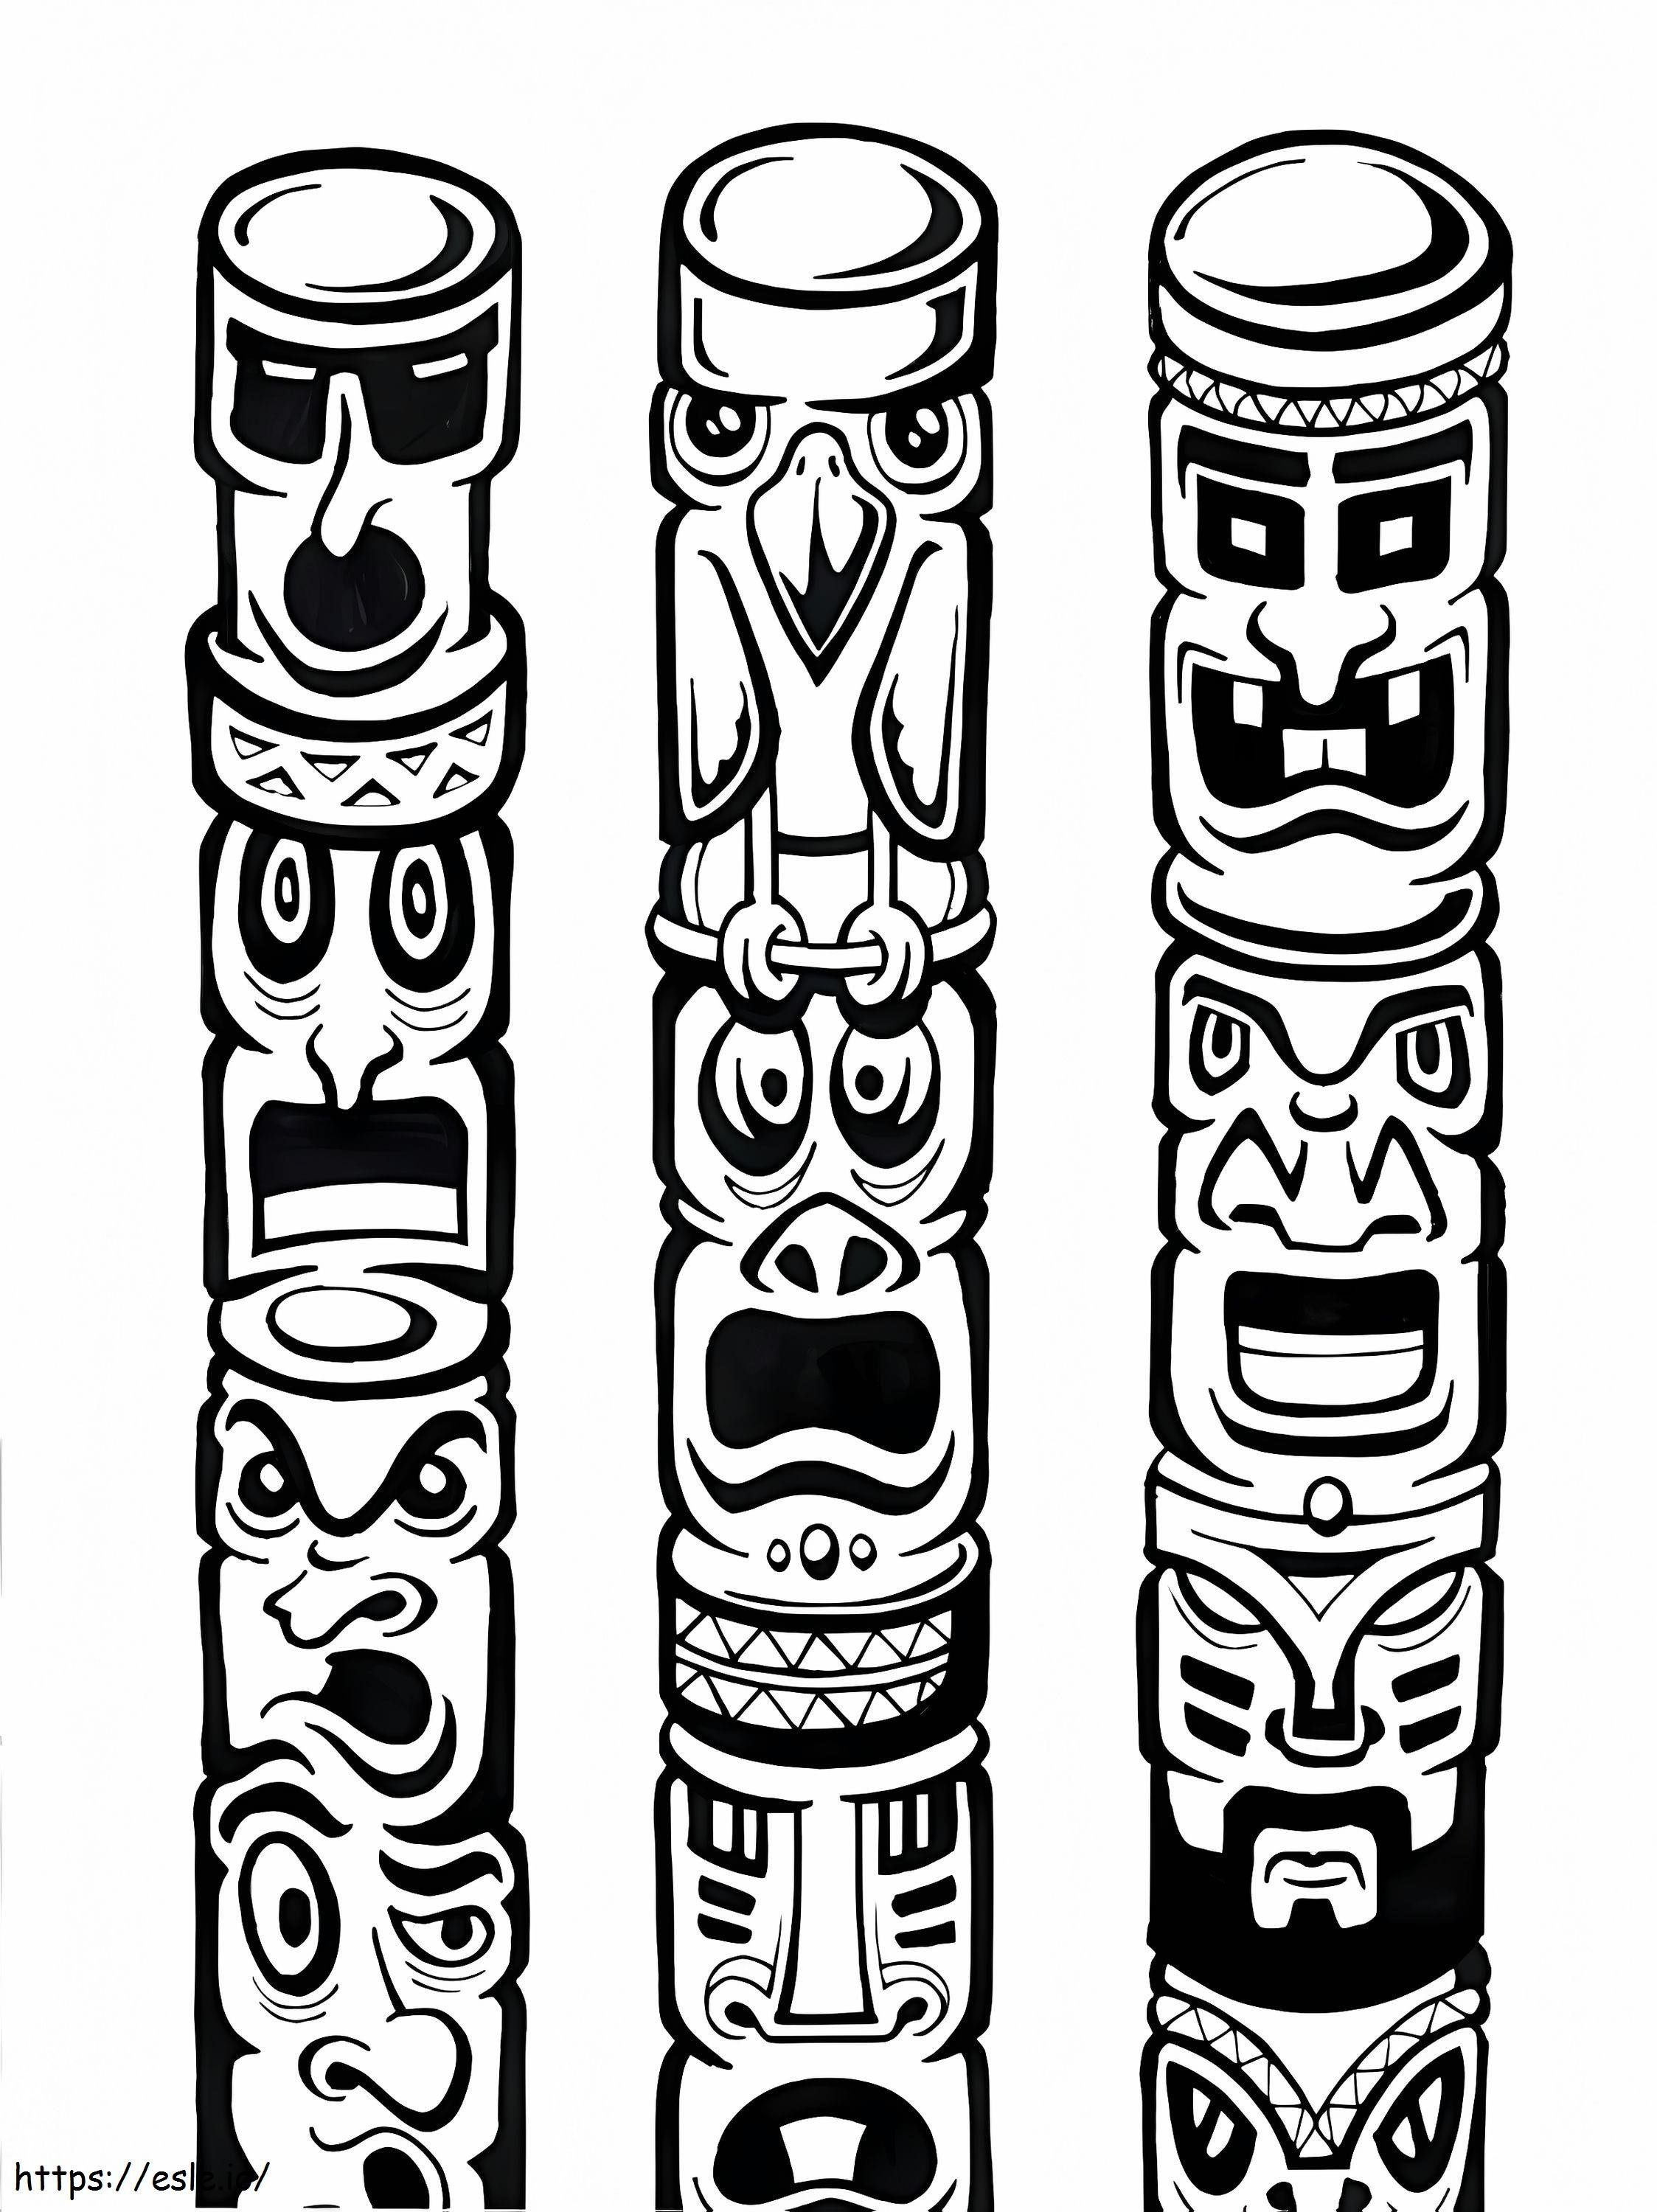 Totem Poles 1 coloring page